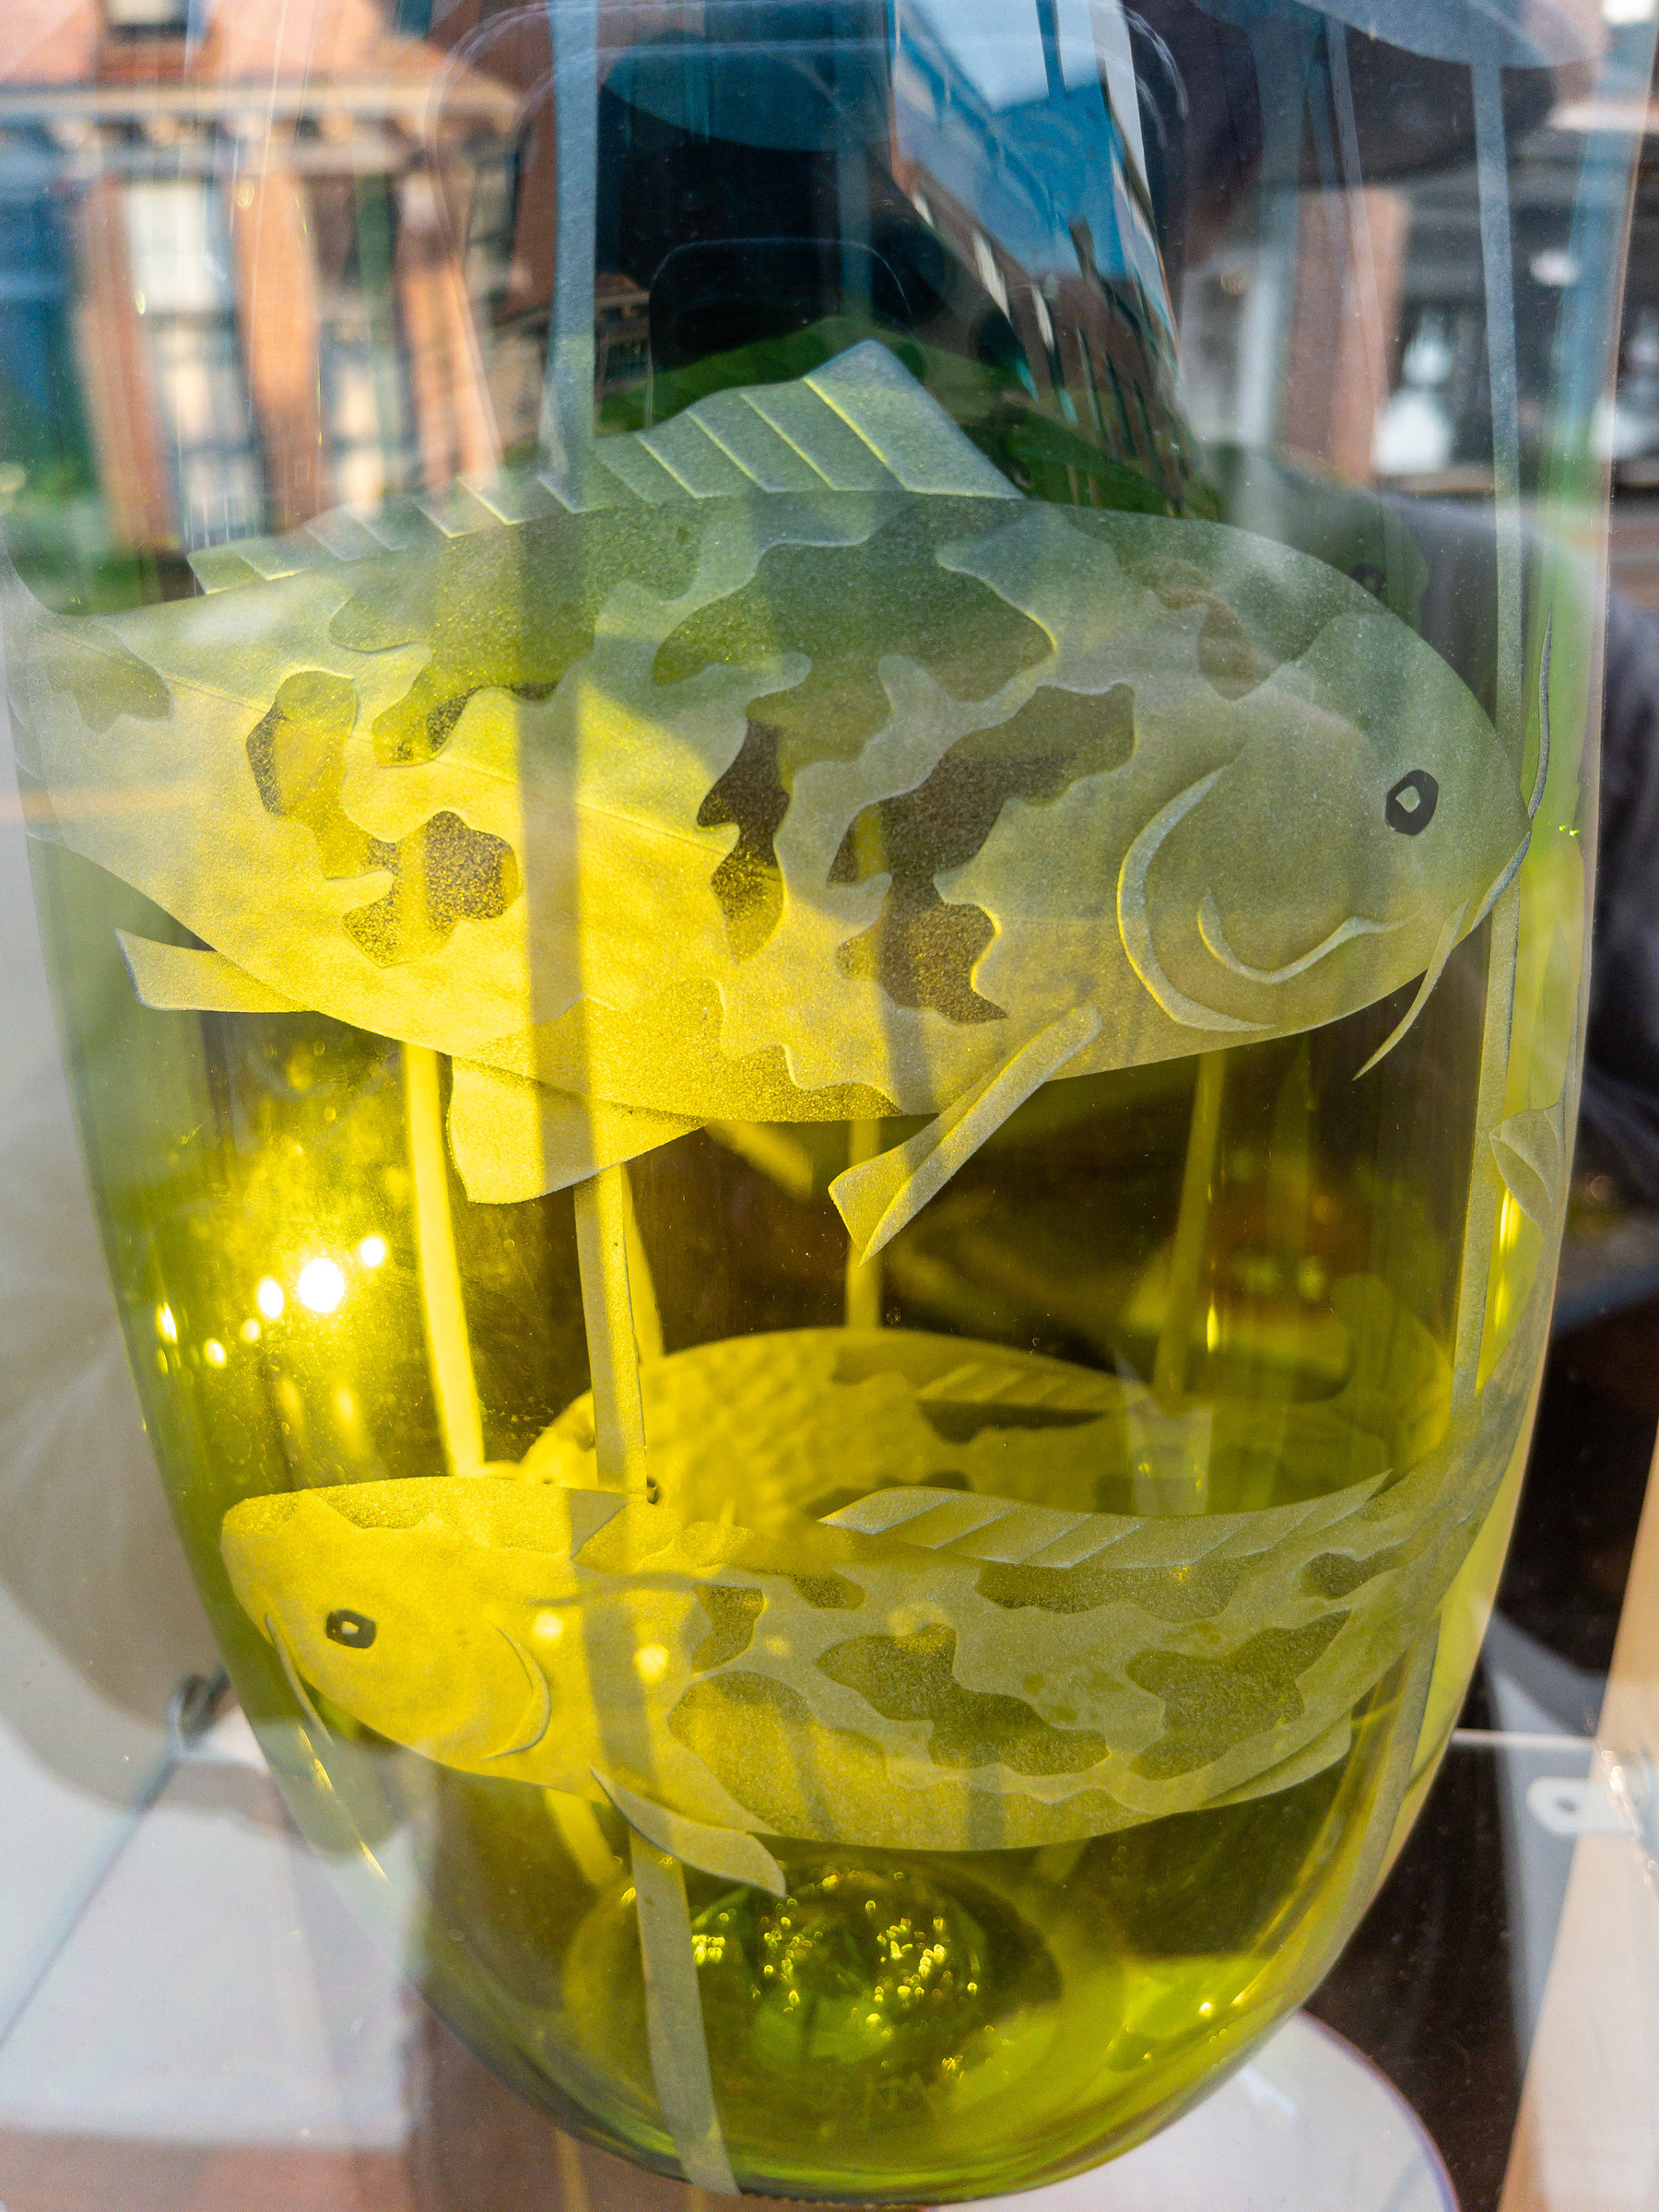 Yellow vase with carp etched into the sides in a shop window.